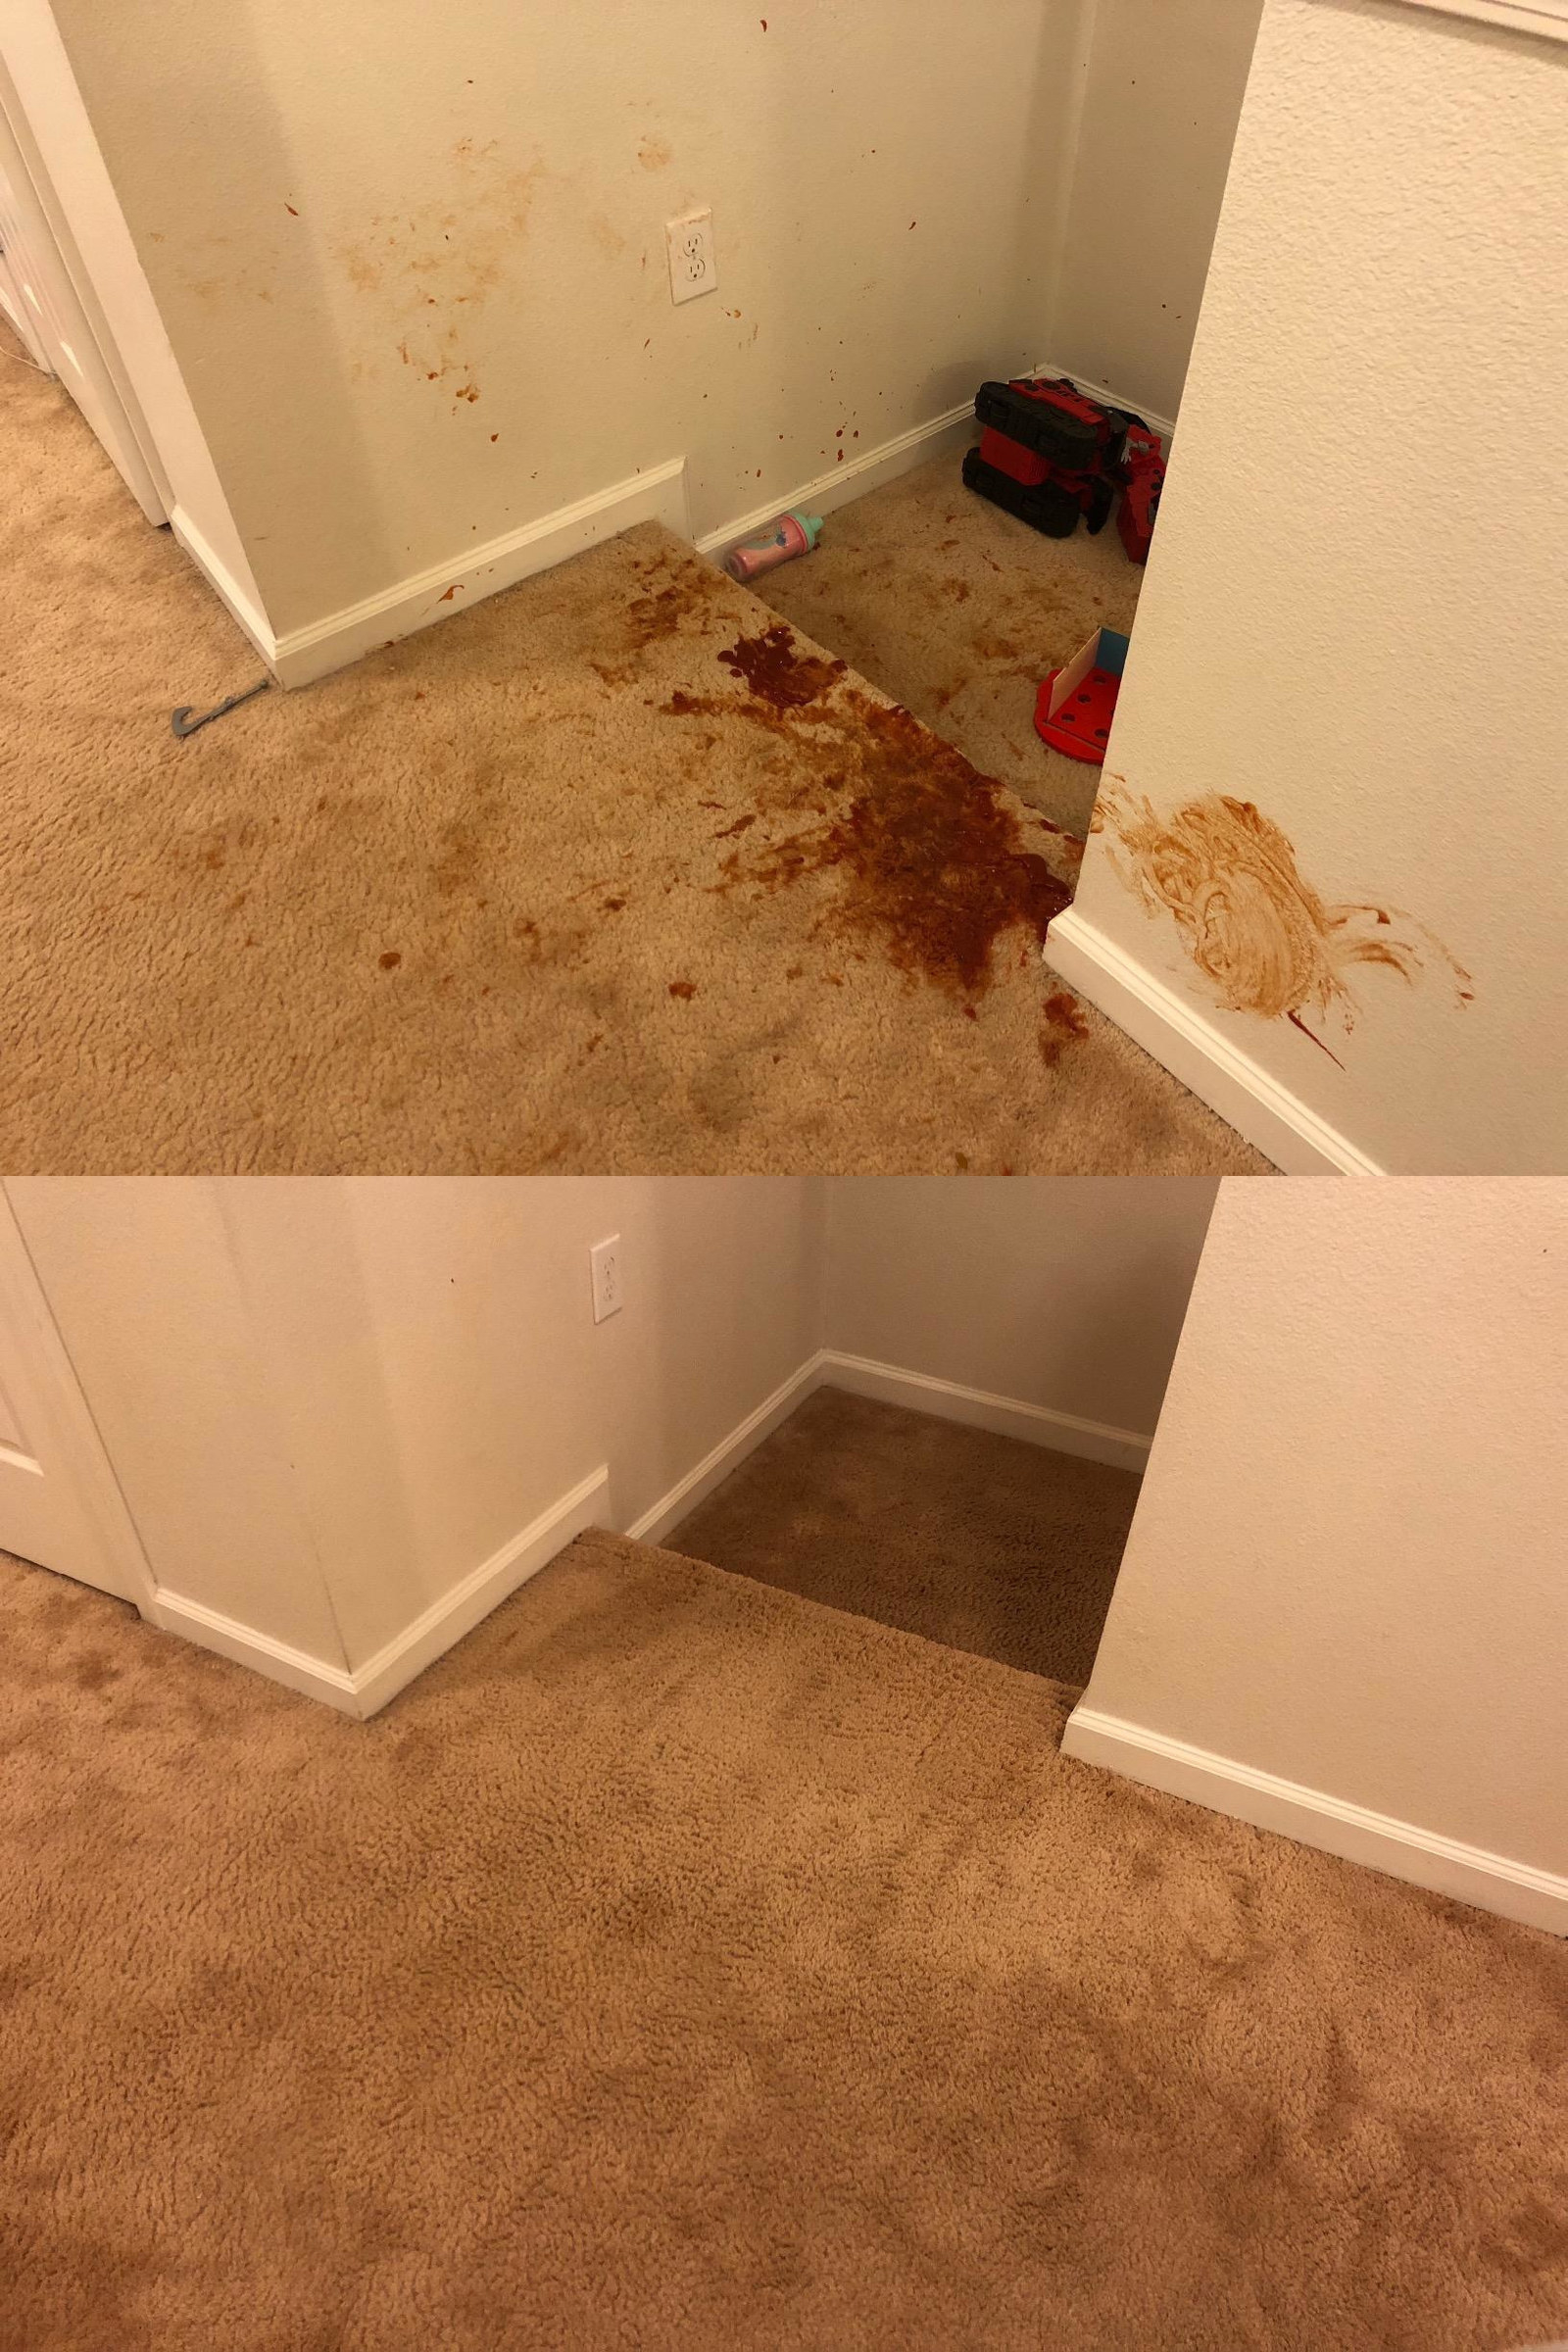 A photo showing red food stains completely removed from a carpet and walls